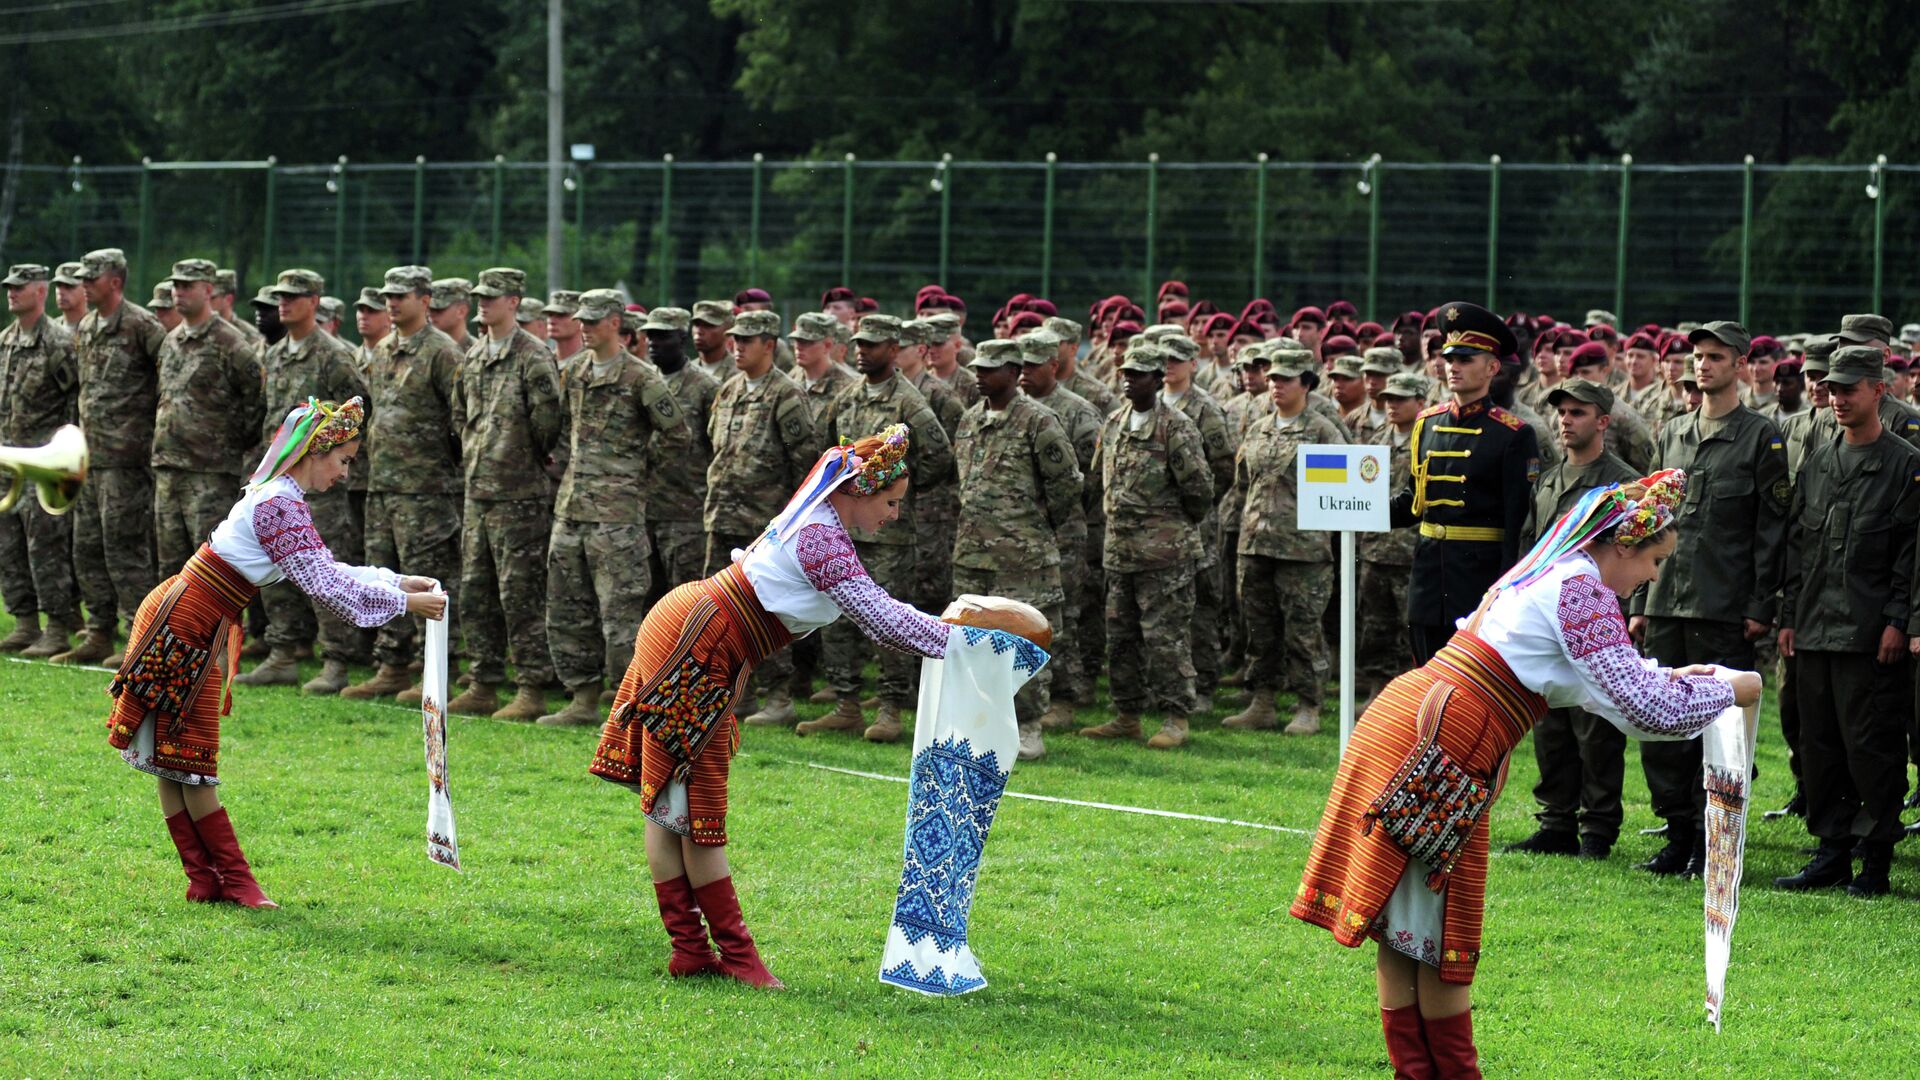 Ukrainian folk dancers perform for Ukrainian and US servicemen in a ceremony for joint-drill exercises between the two countries in Yavoriv polygon, Lviv district, western Ukraine on 20 July 2015 - Sputnik International, 1920, 07.06.2021